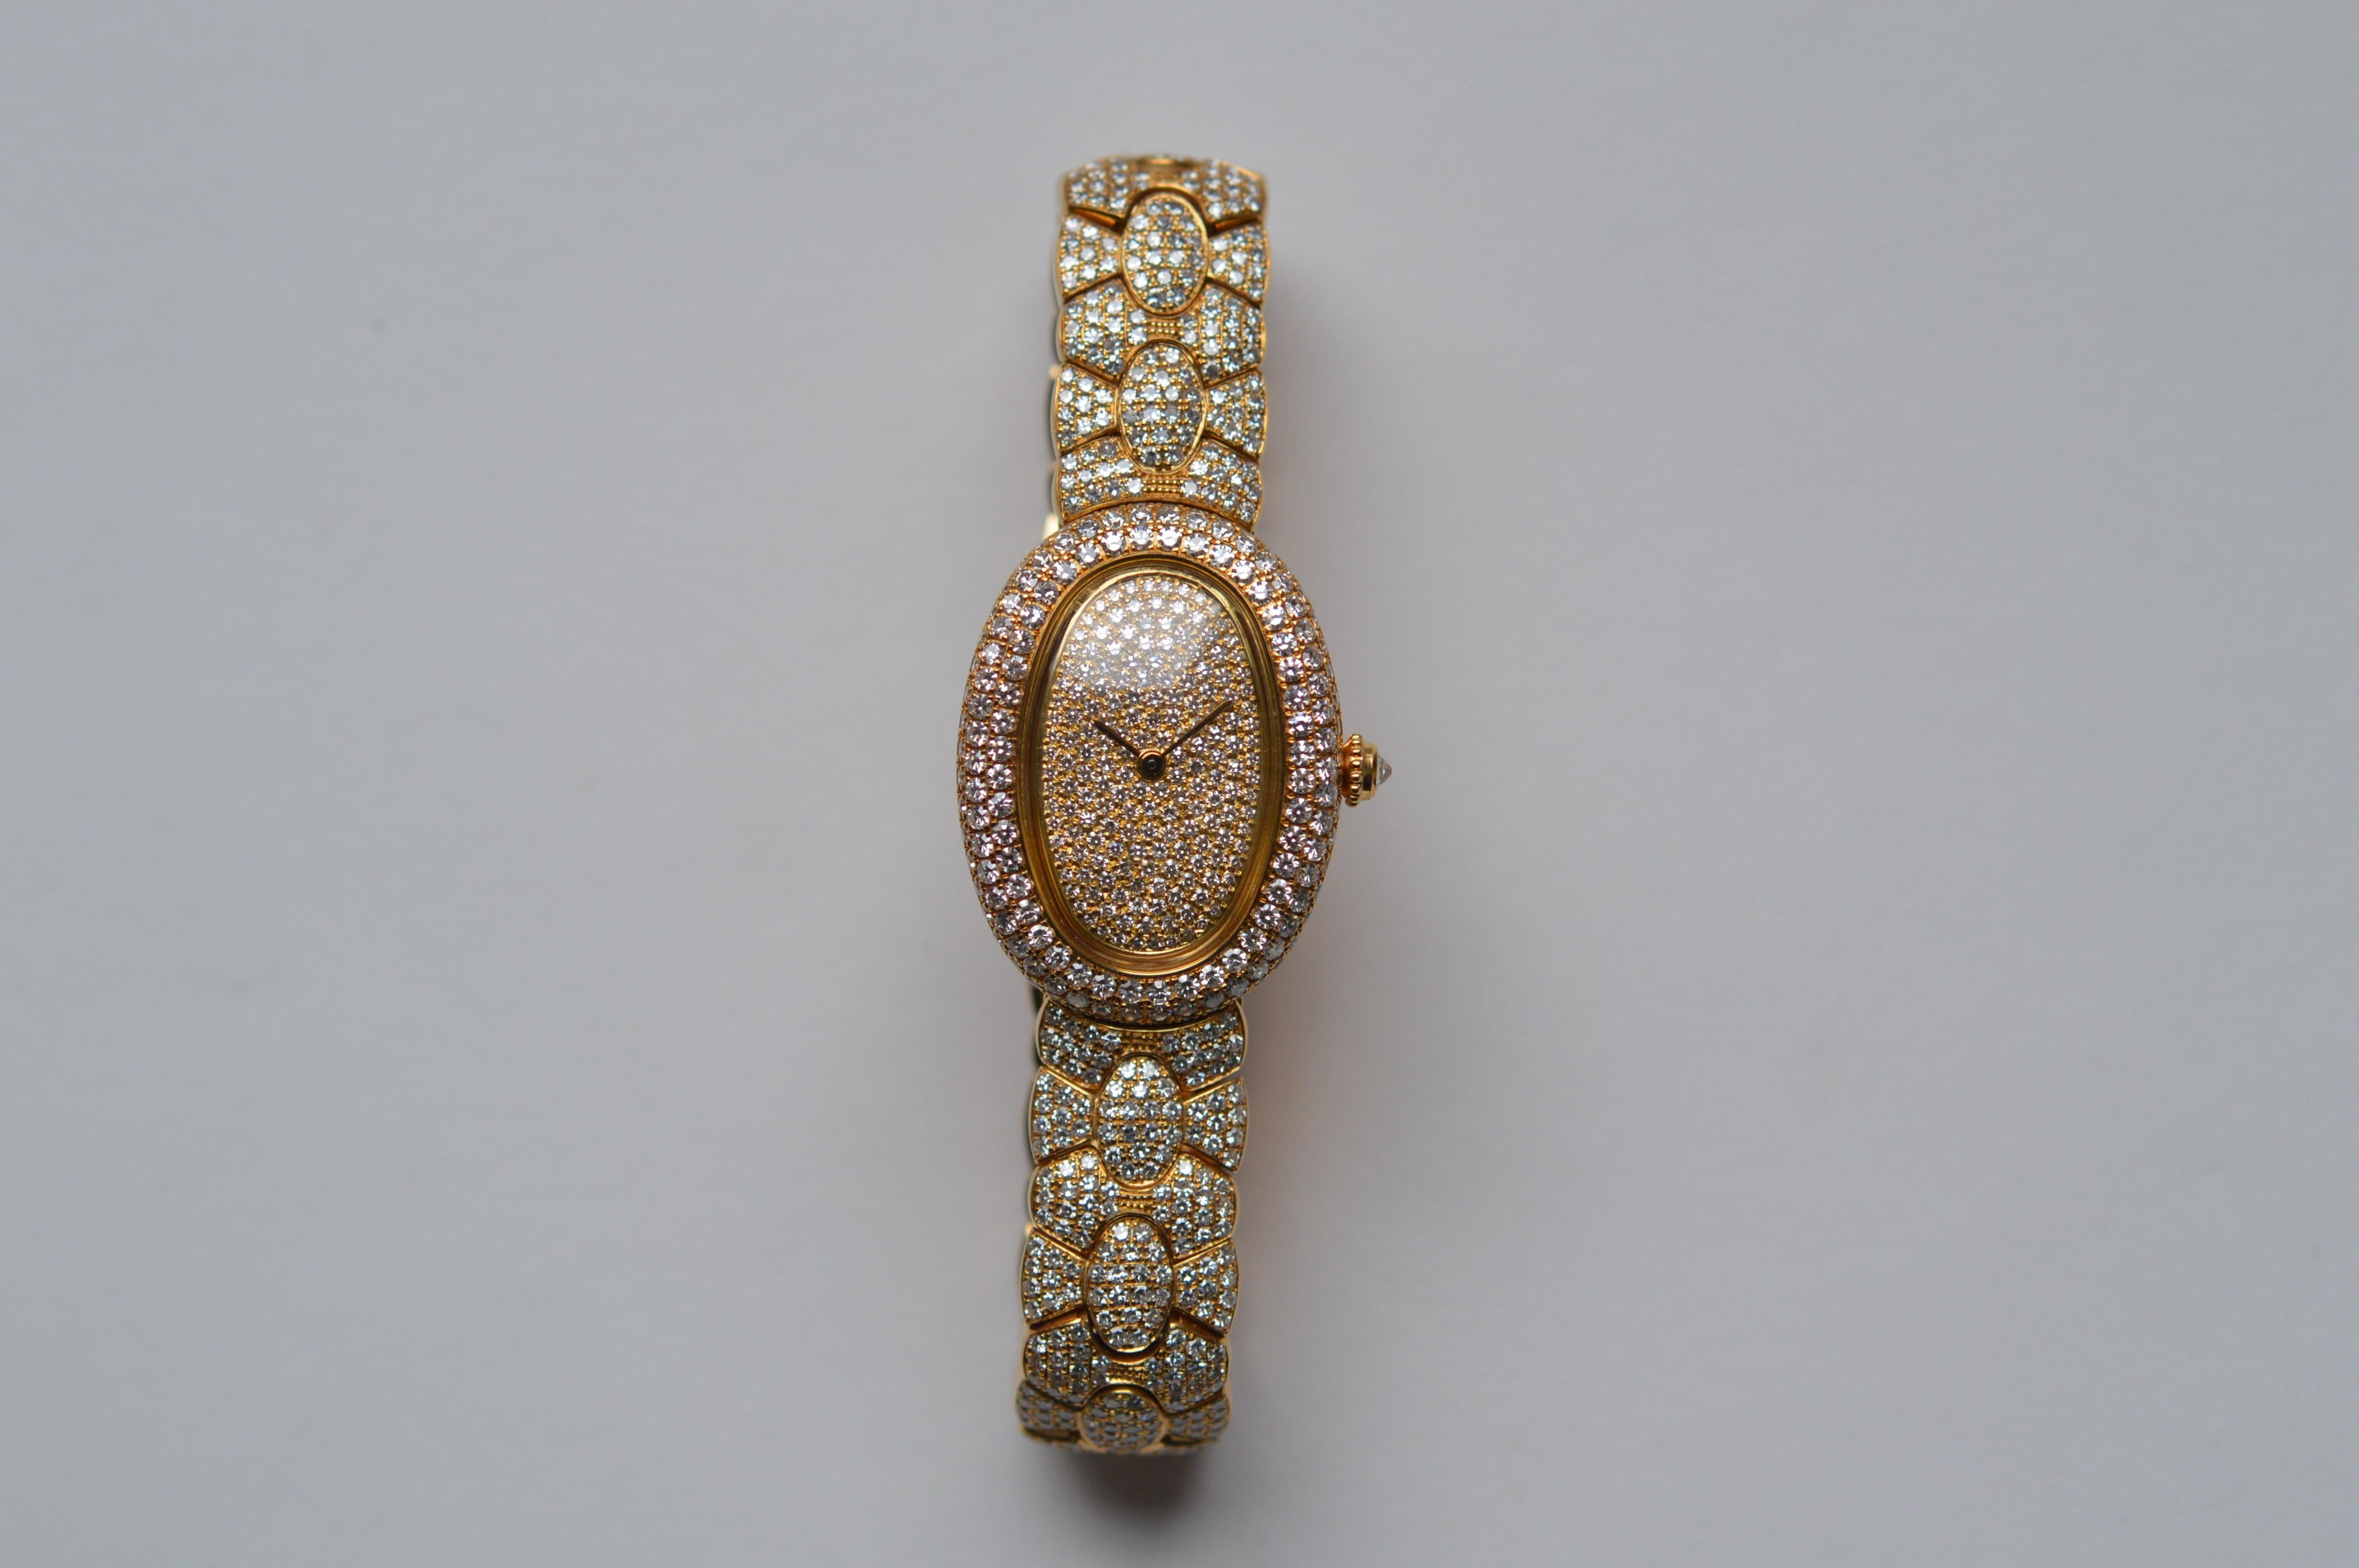 Cartier Baignoire Diamond Pavé
Reference n°WB5009BW
20mm X 29mm Size
18K Yellow Gold
Diamond pavé Dial
Custom diamond Setting
Set with 960 Round Diamond for a total weight of 8.66 carats
Quartz Movement
Brand new never used
Full Set
Original Cartier